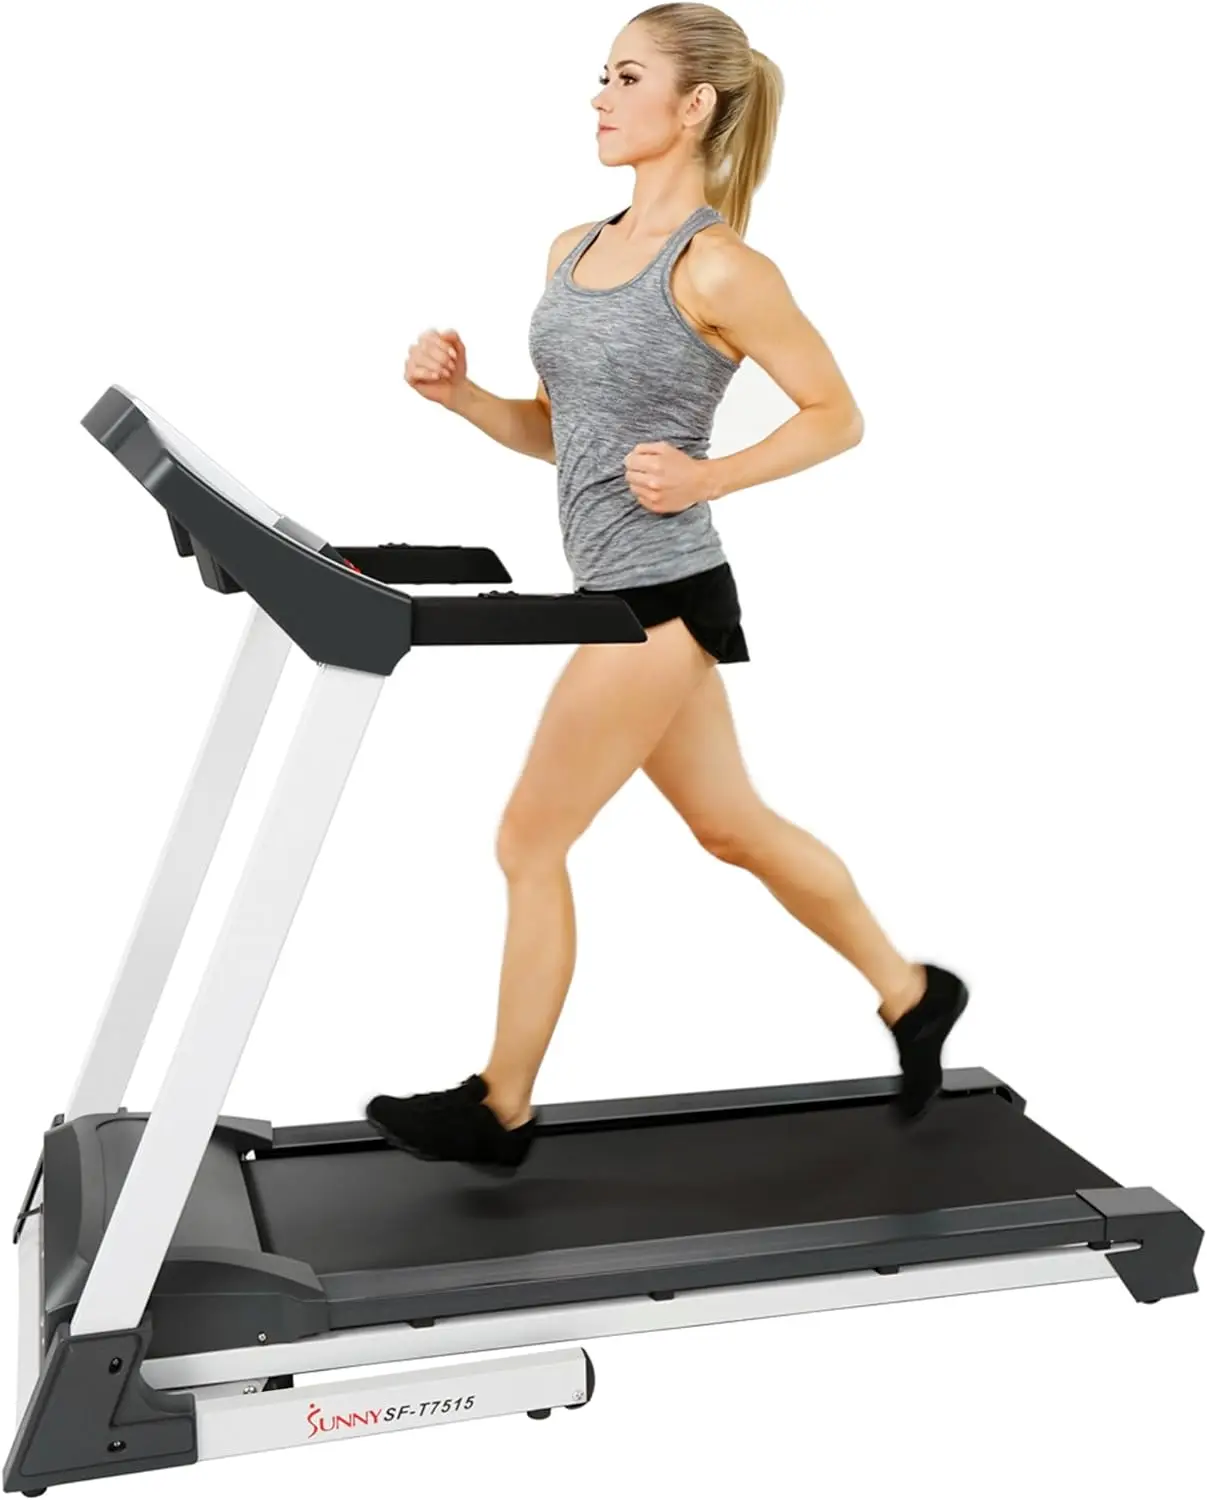 

Fitness Premium Treadmill with Auto Incline, Dedicated Speed Buttons, Double Deck Technology, Digital Performance Display